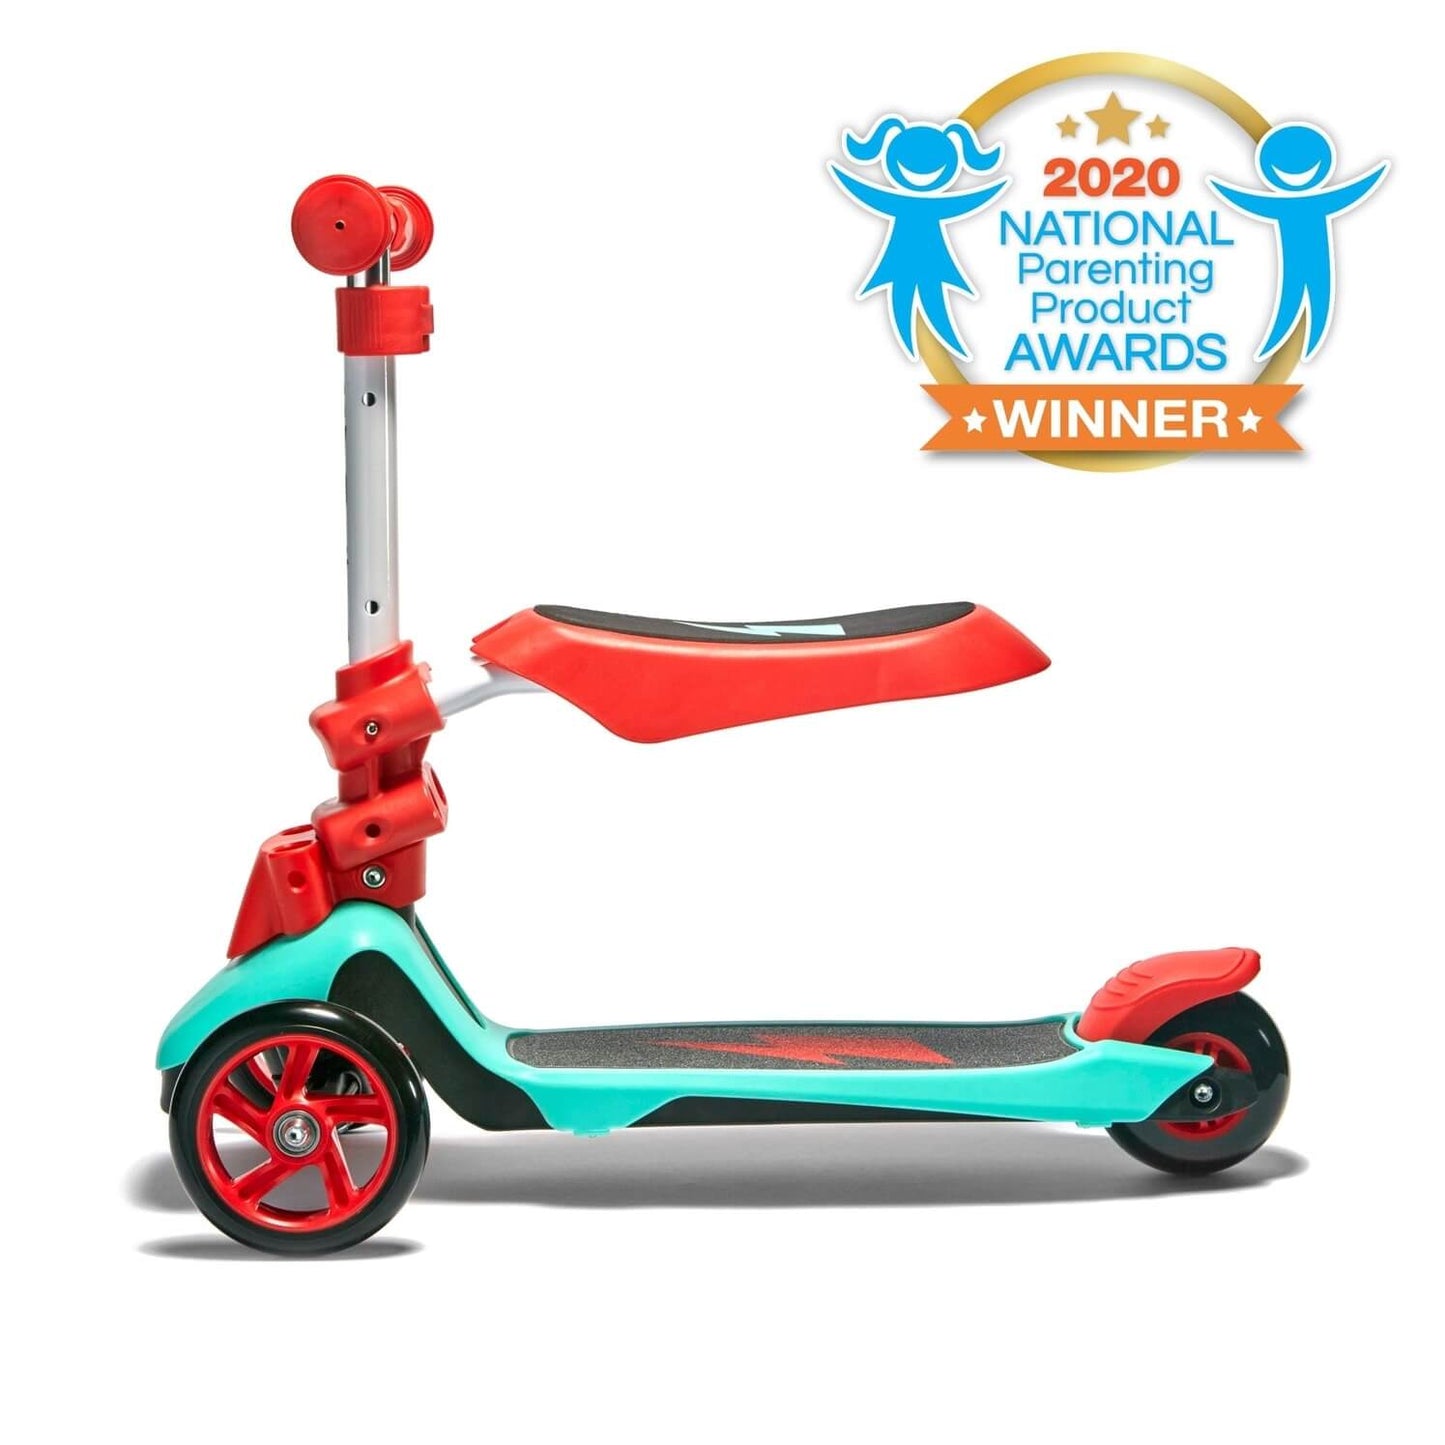 Award winning Svolta Ace 2-in-1 Toddler Scooter Ride On Red Aqua Side